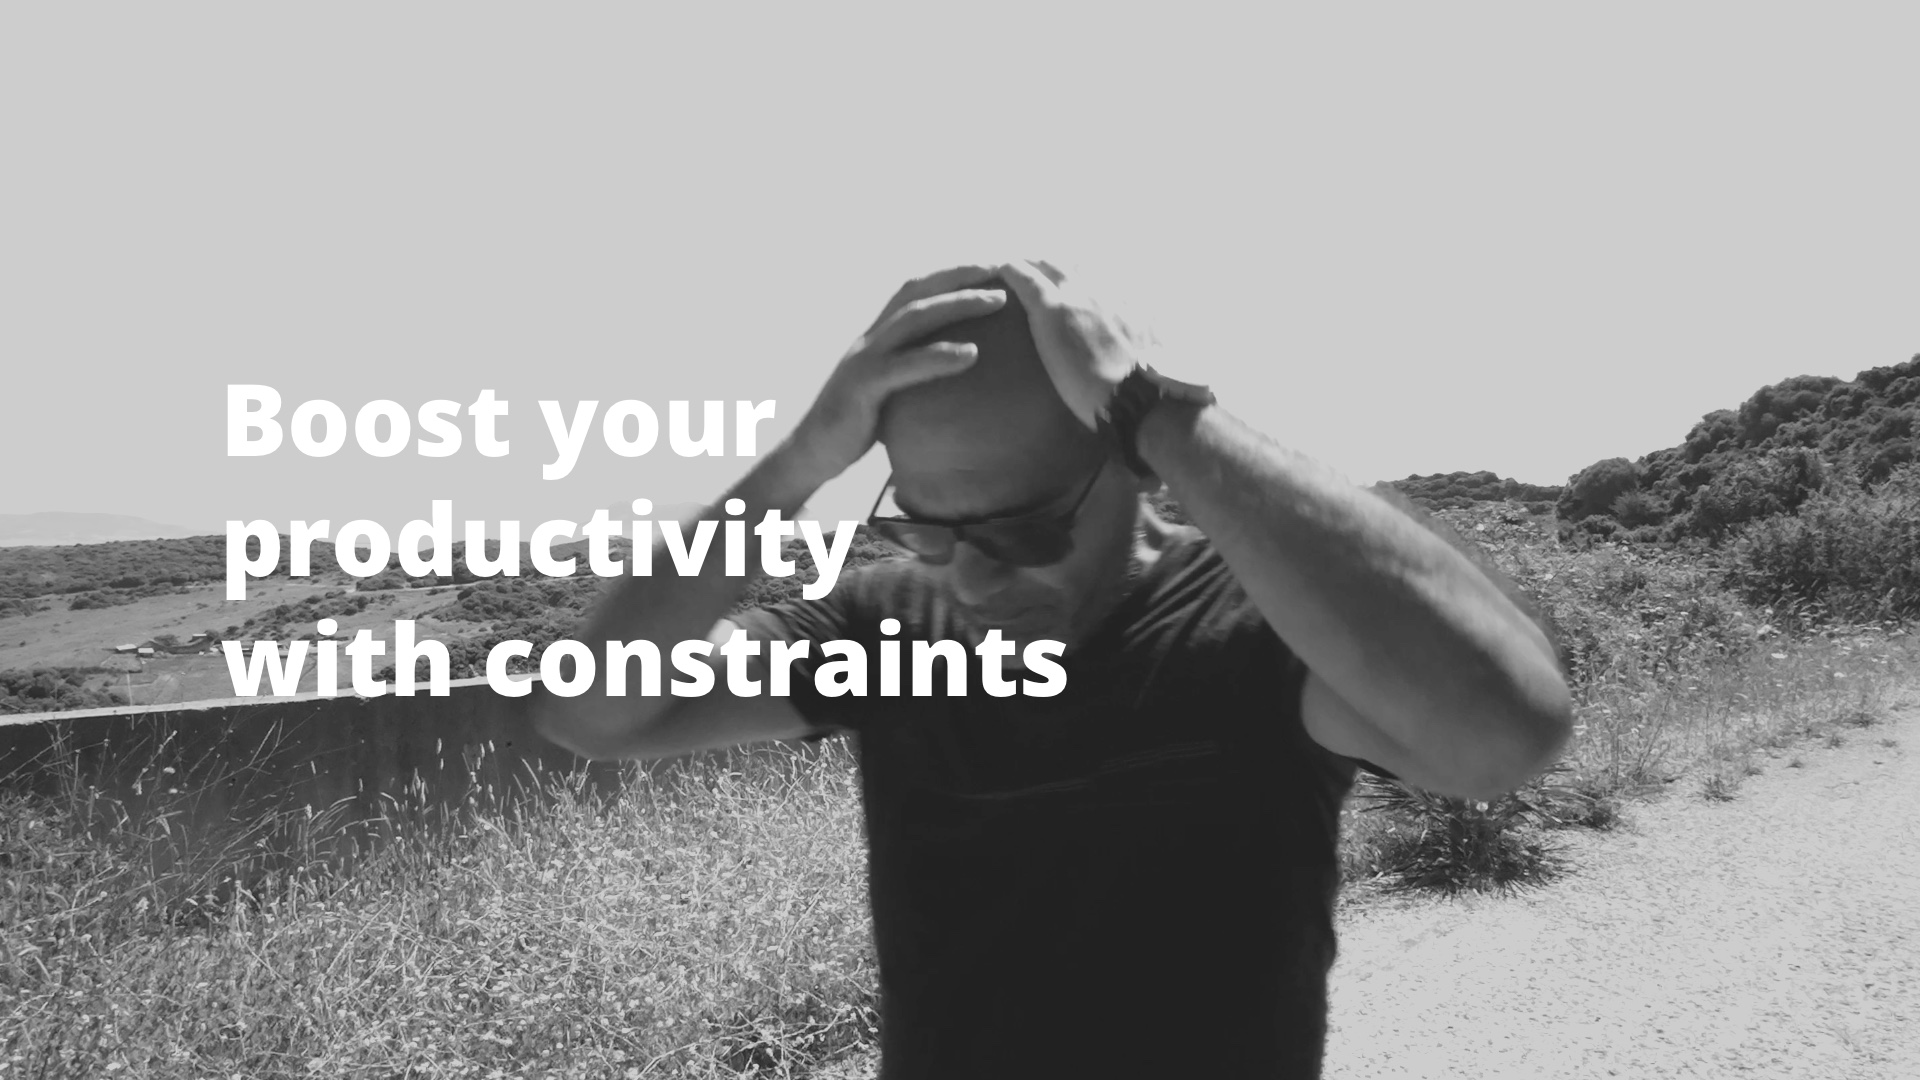 Boost your productivity with constraints